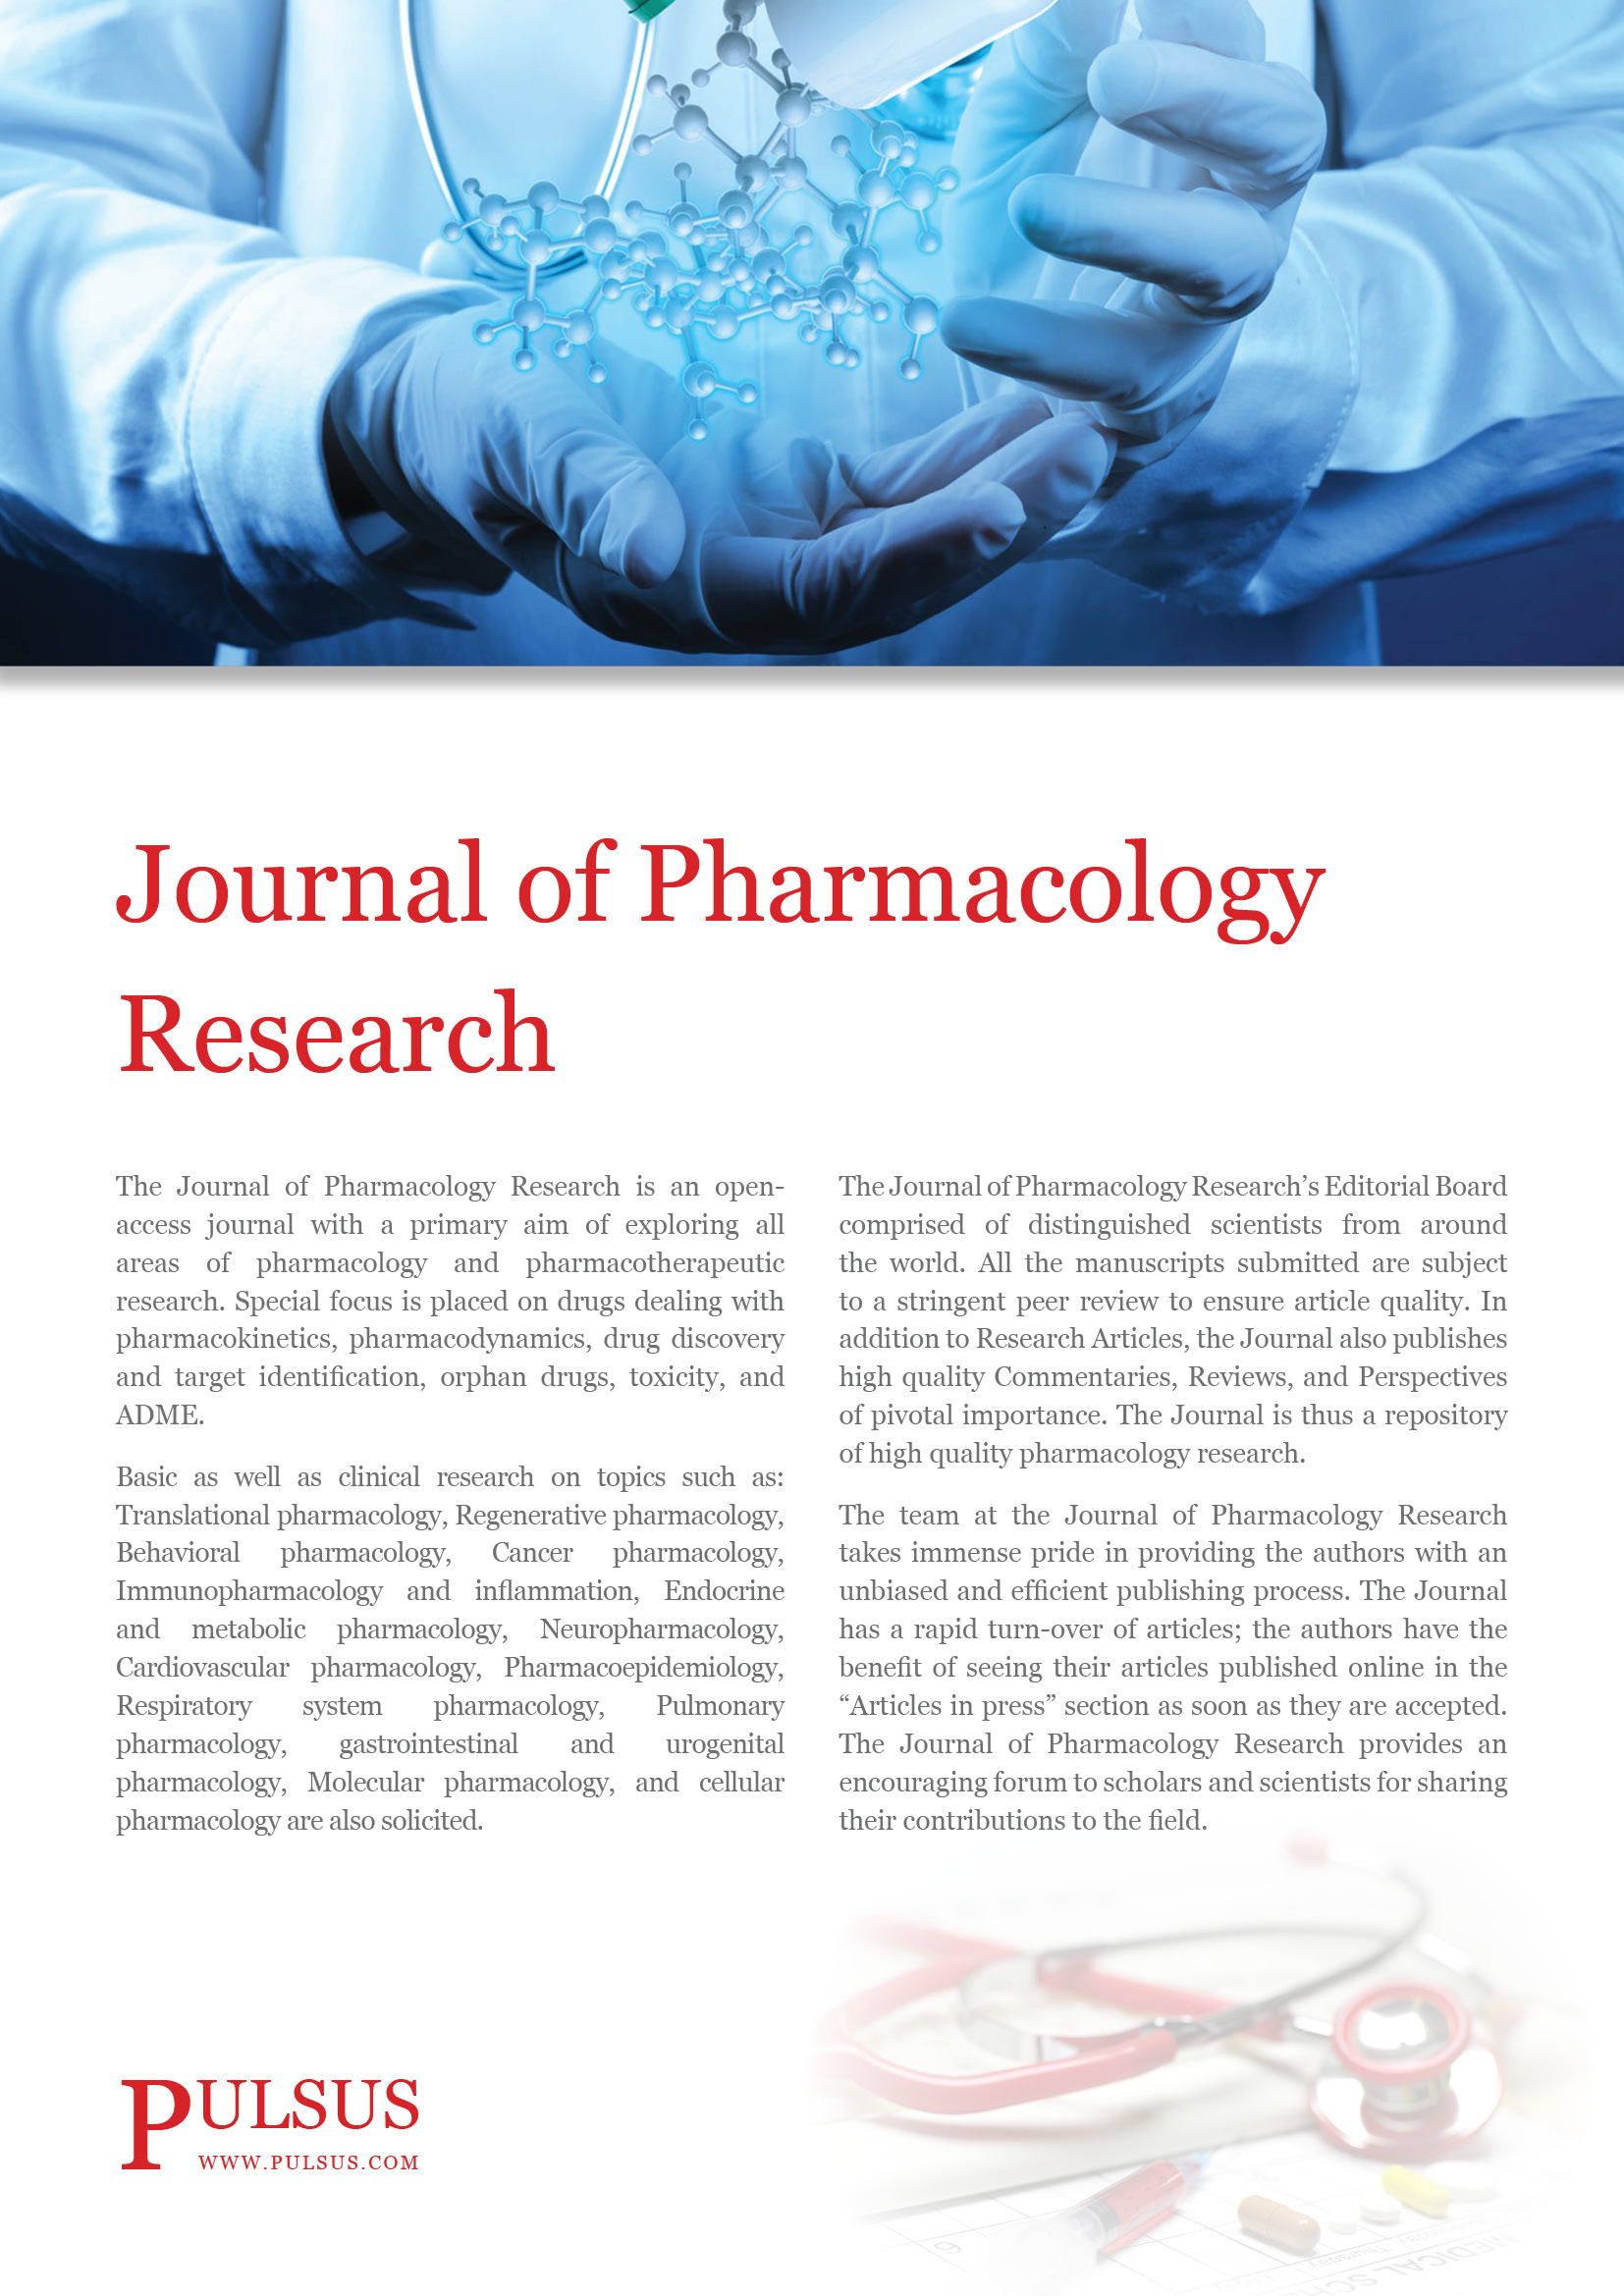 Journal of Pharmacology Research